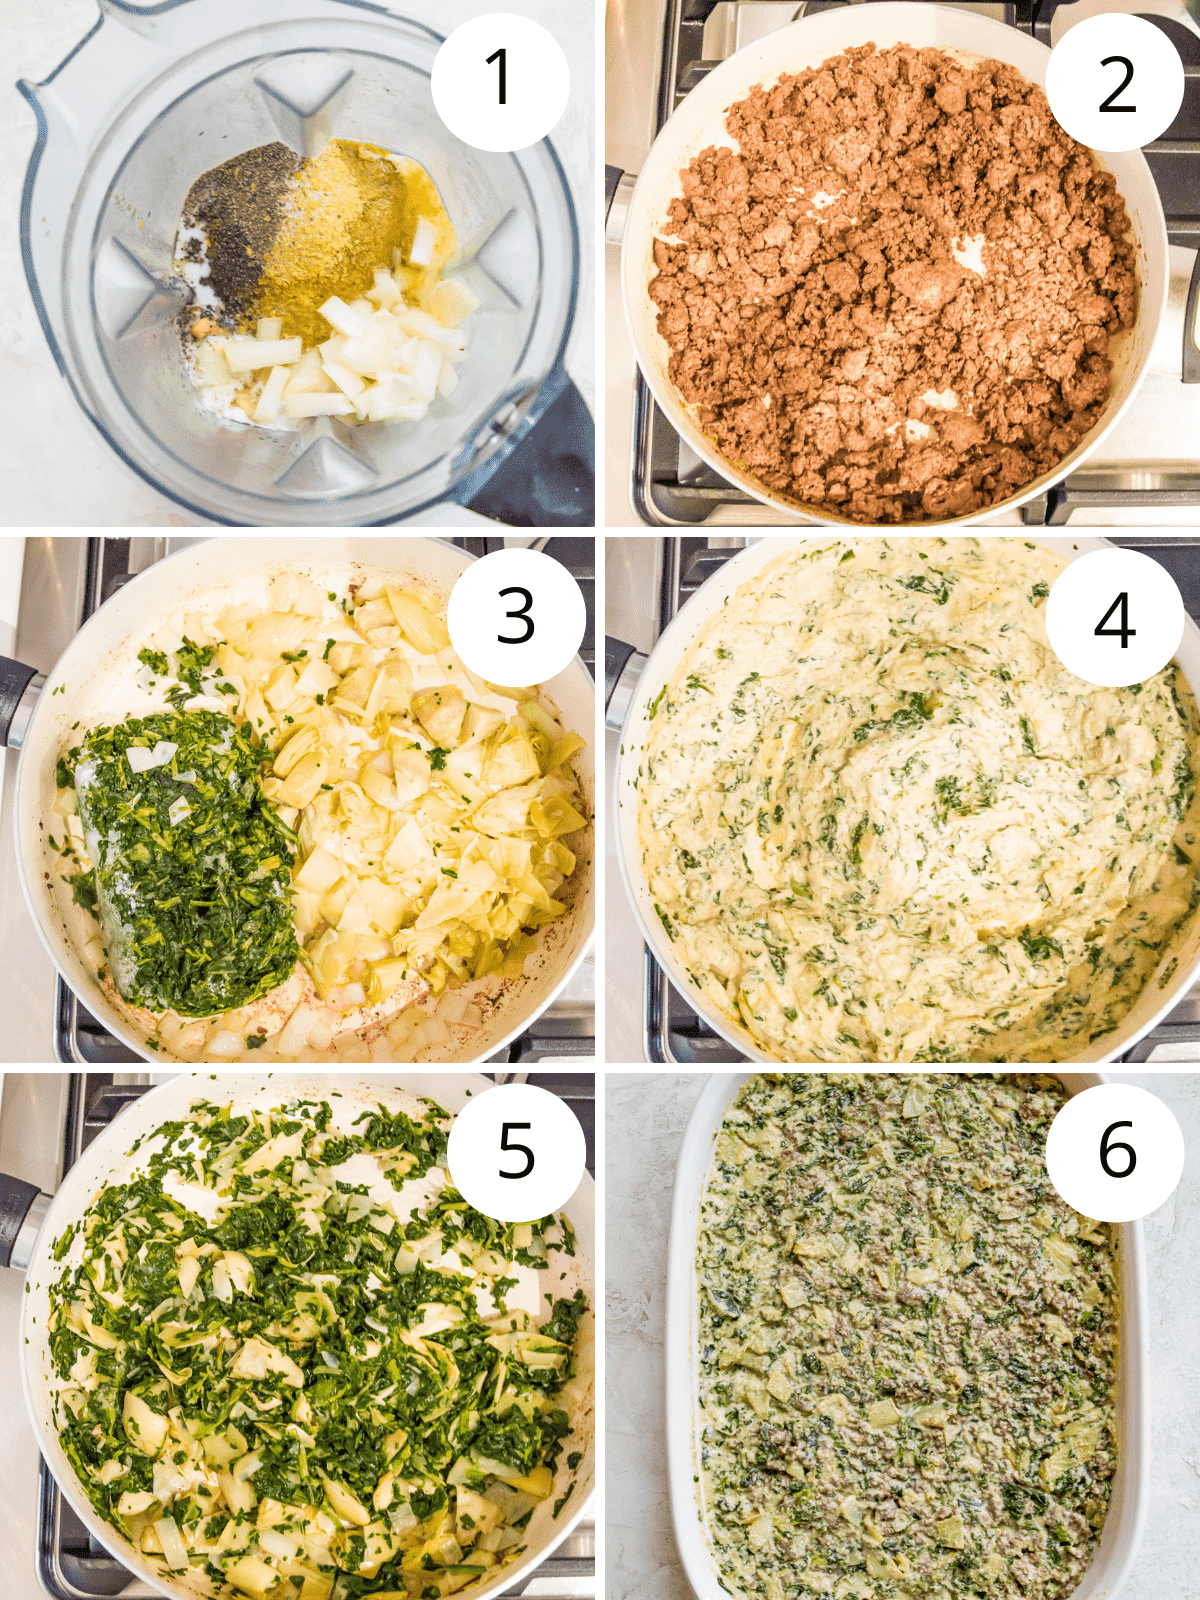 Step by step directions for making a spinach and artichoke ground beef casserole.